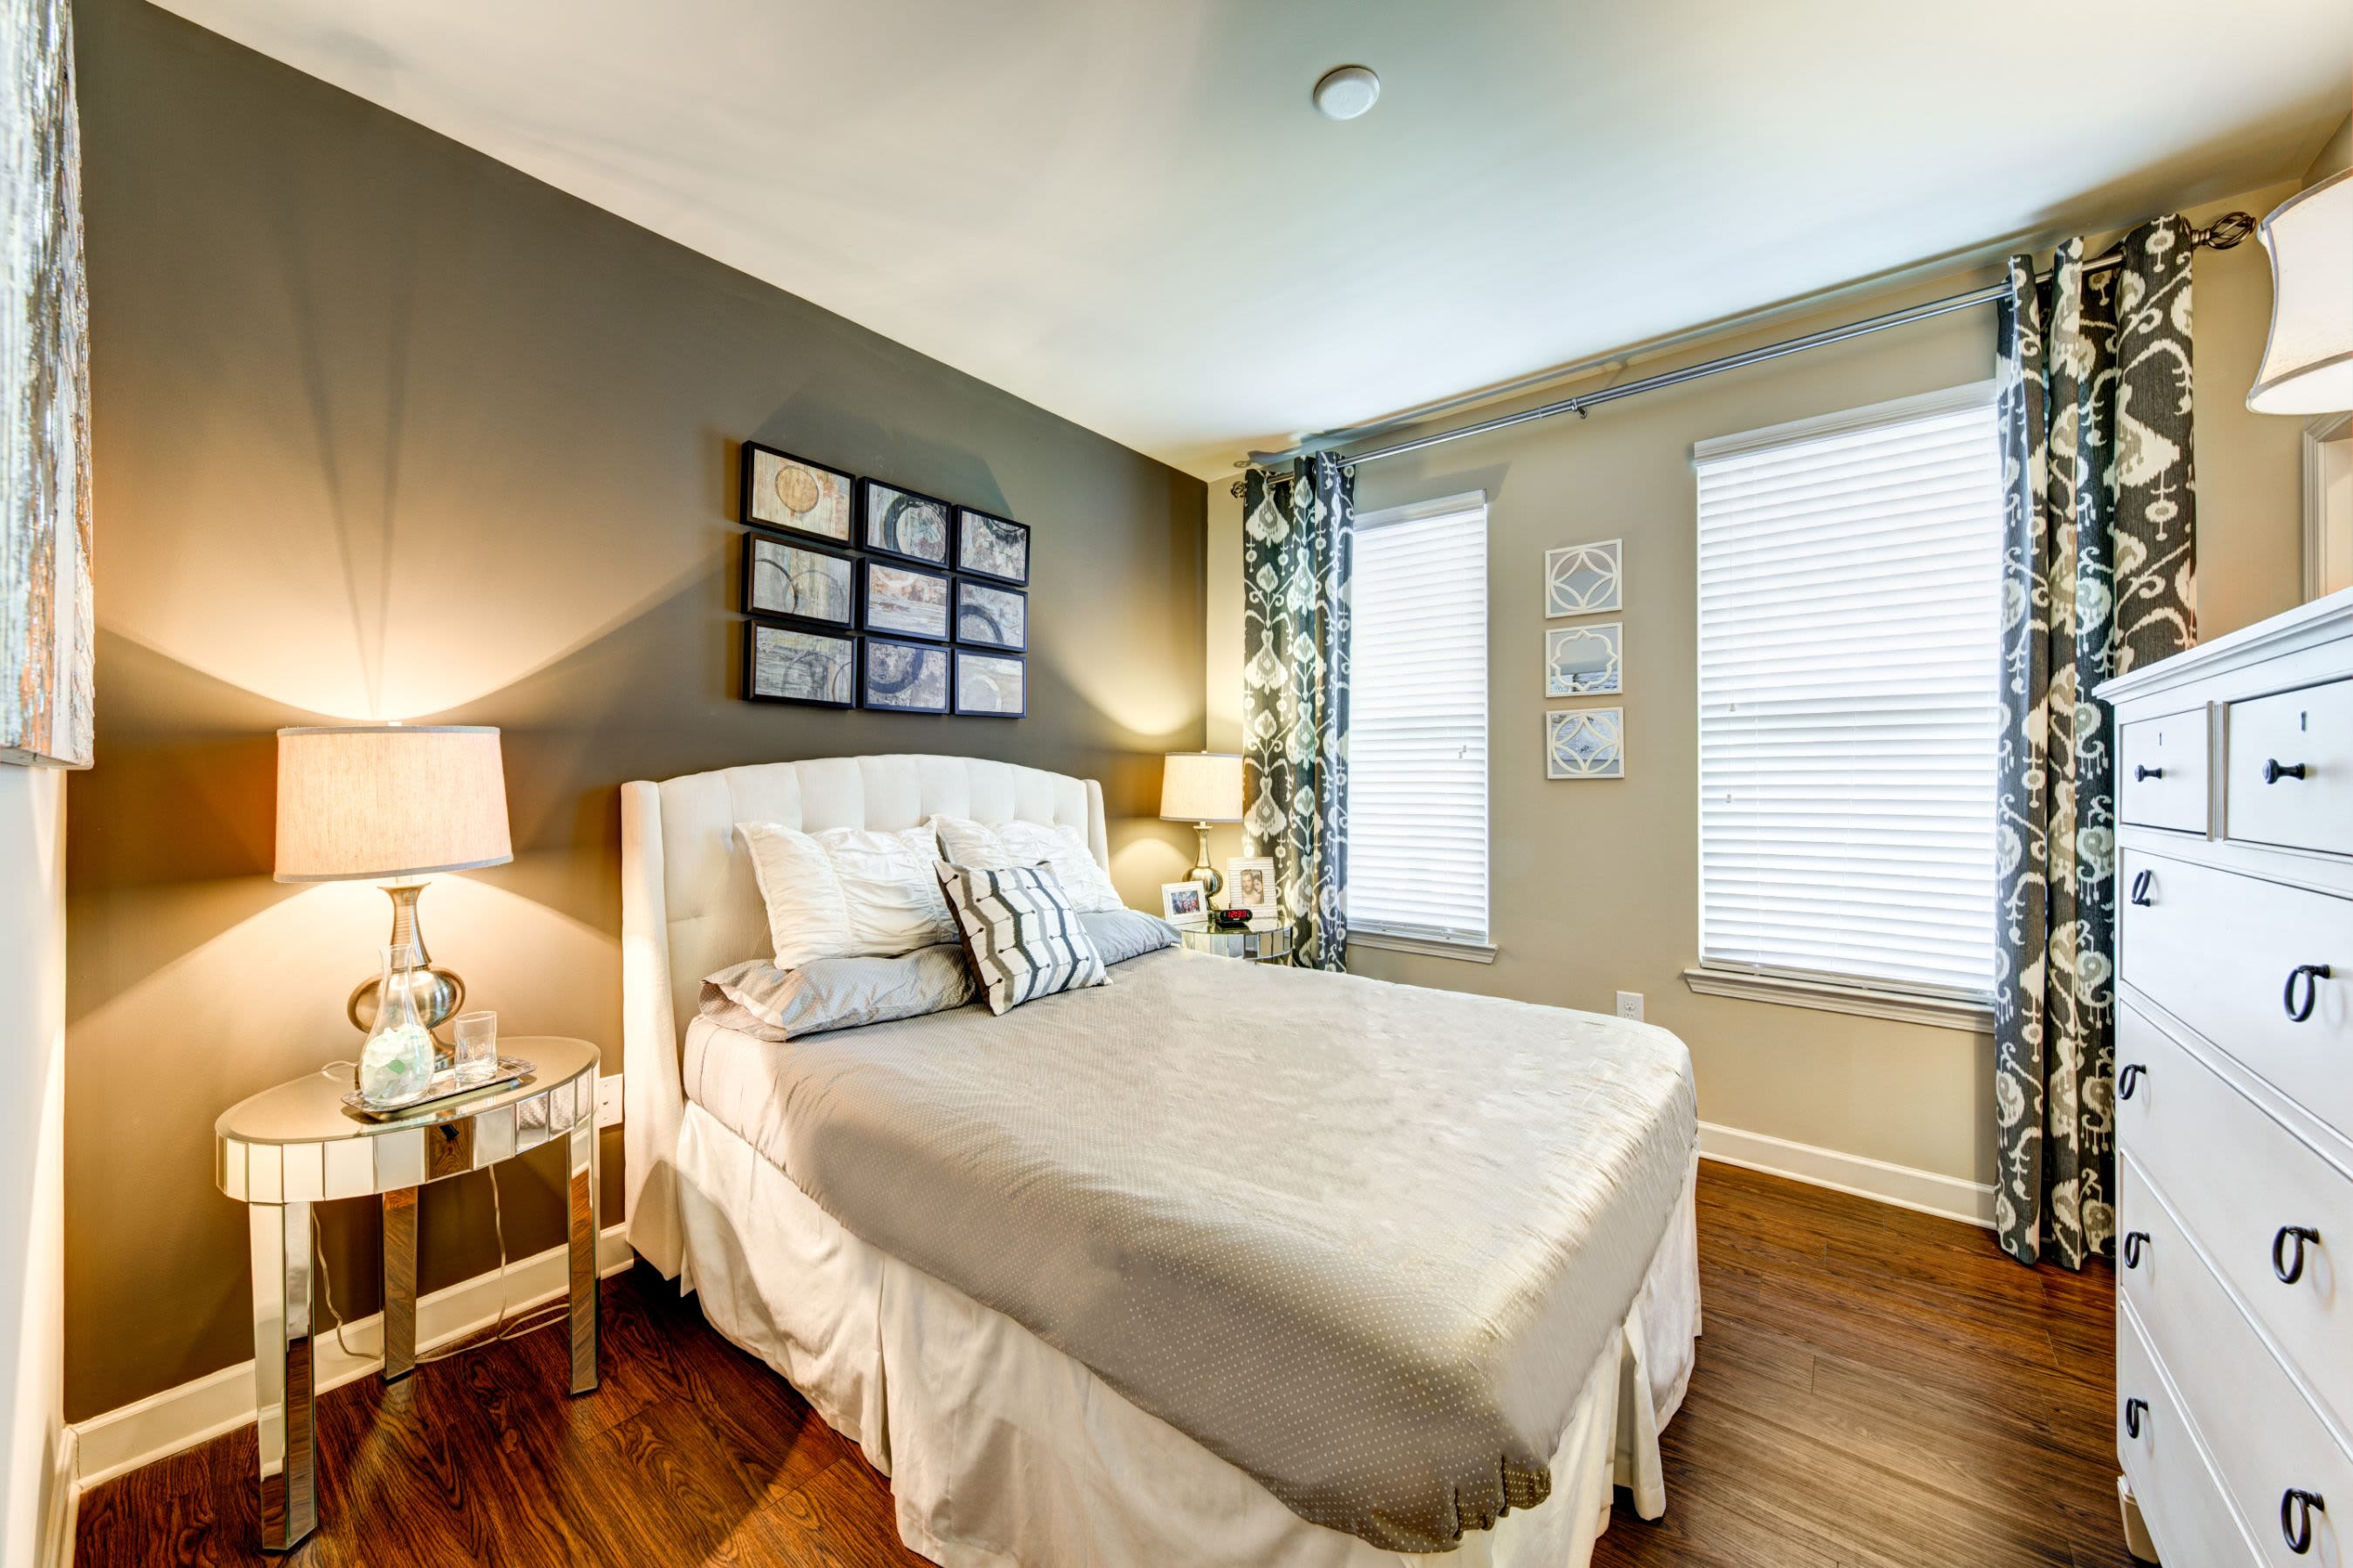 Bedroom with wood style floors at Marquis at Morrison Plantation in Mooresville, North Carolina